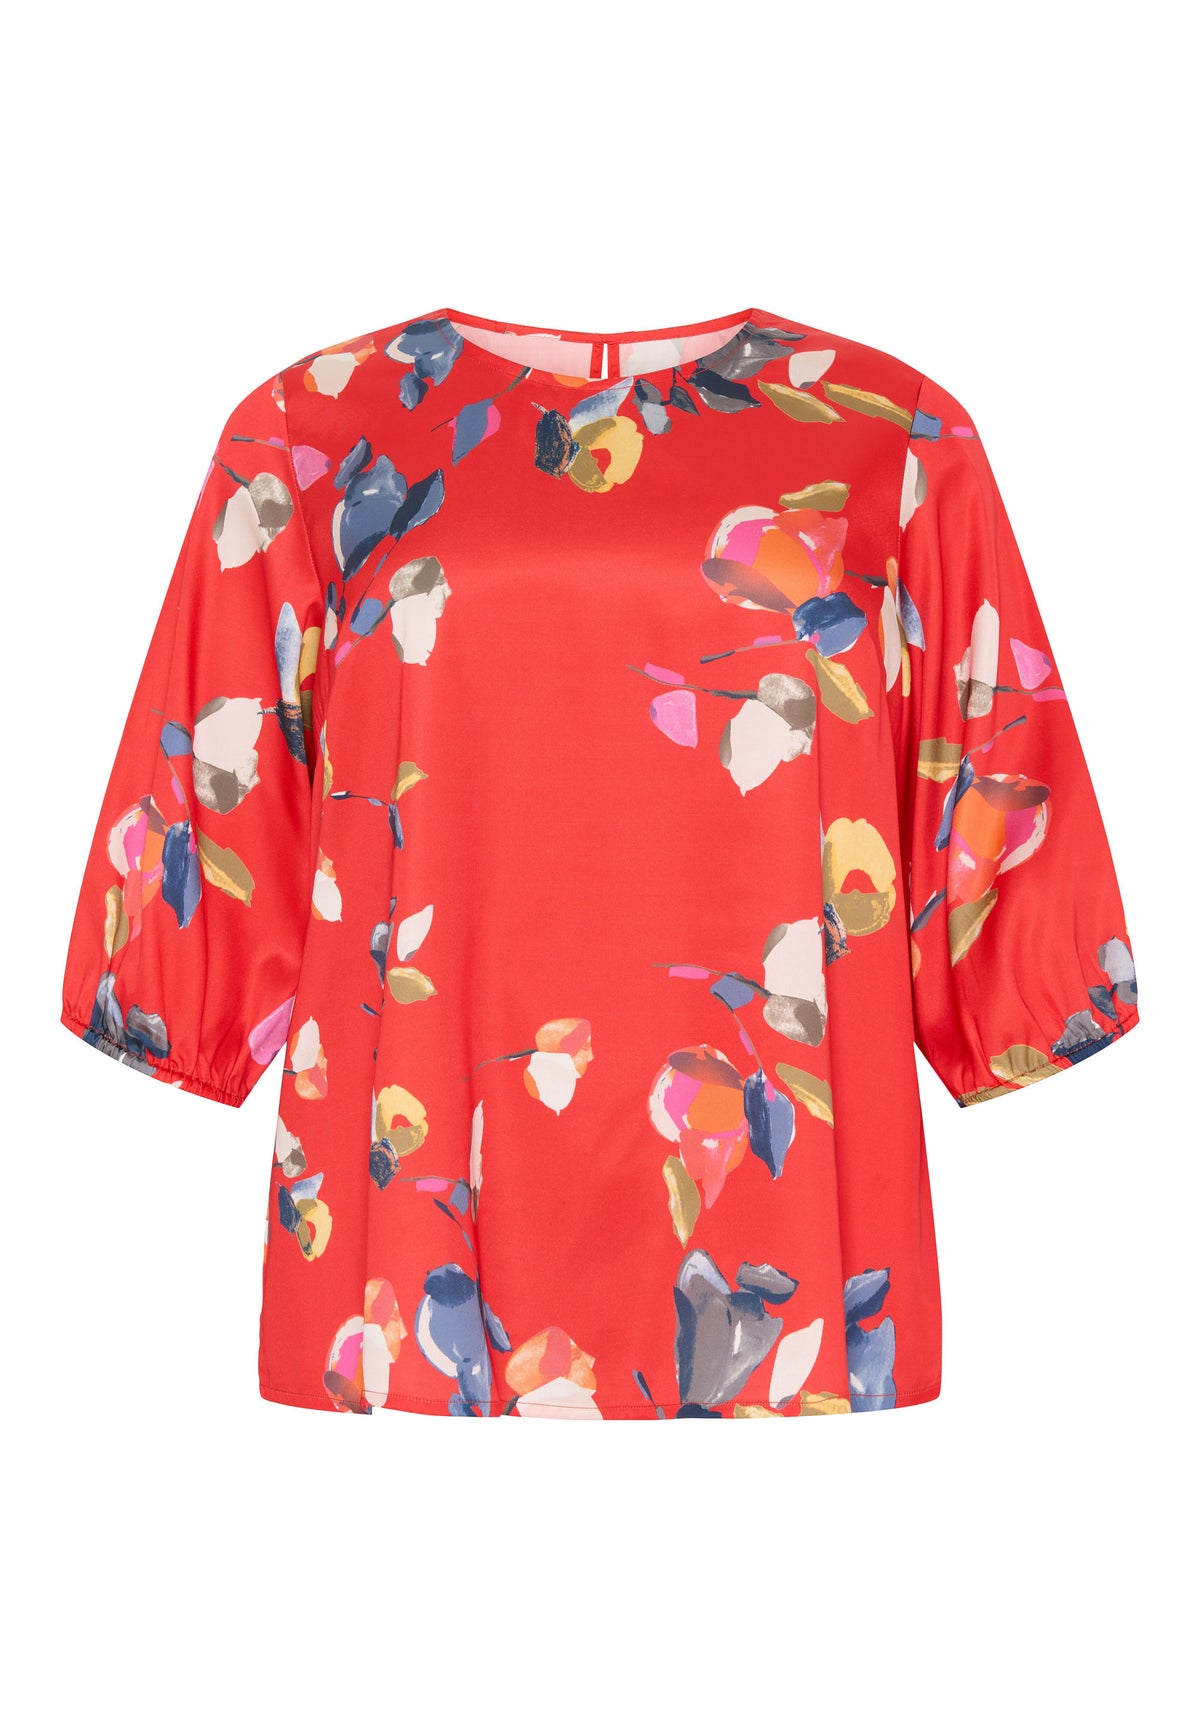 NO. 1 BY OX Elegant bluse Bluser Summer Red w Flowers